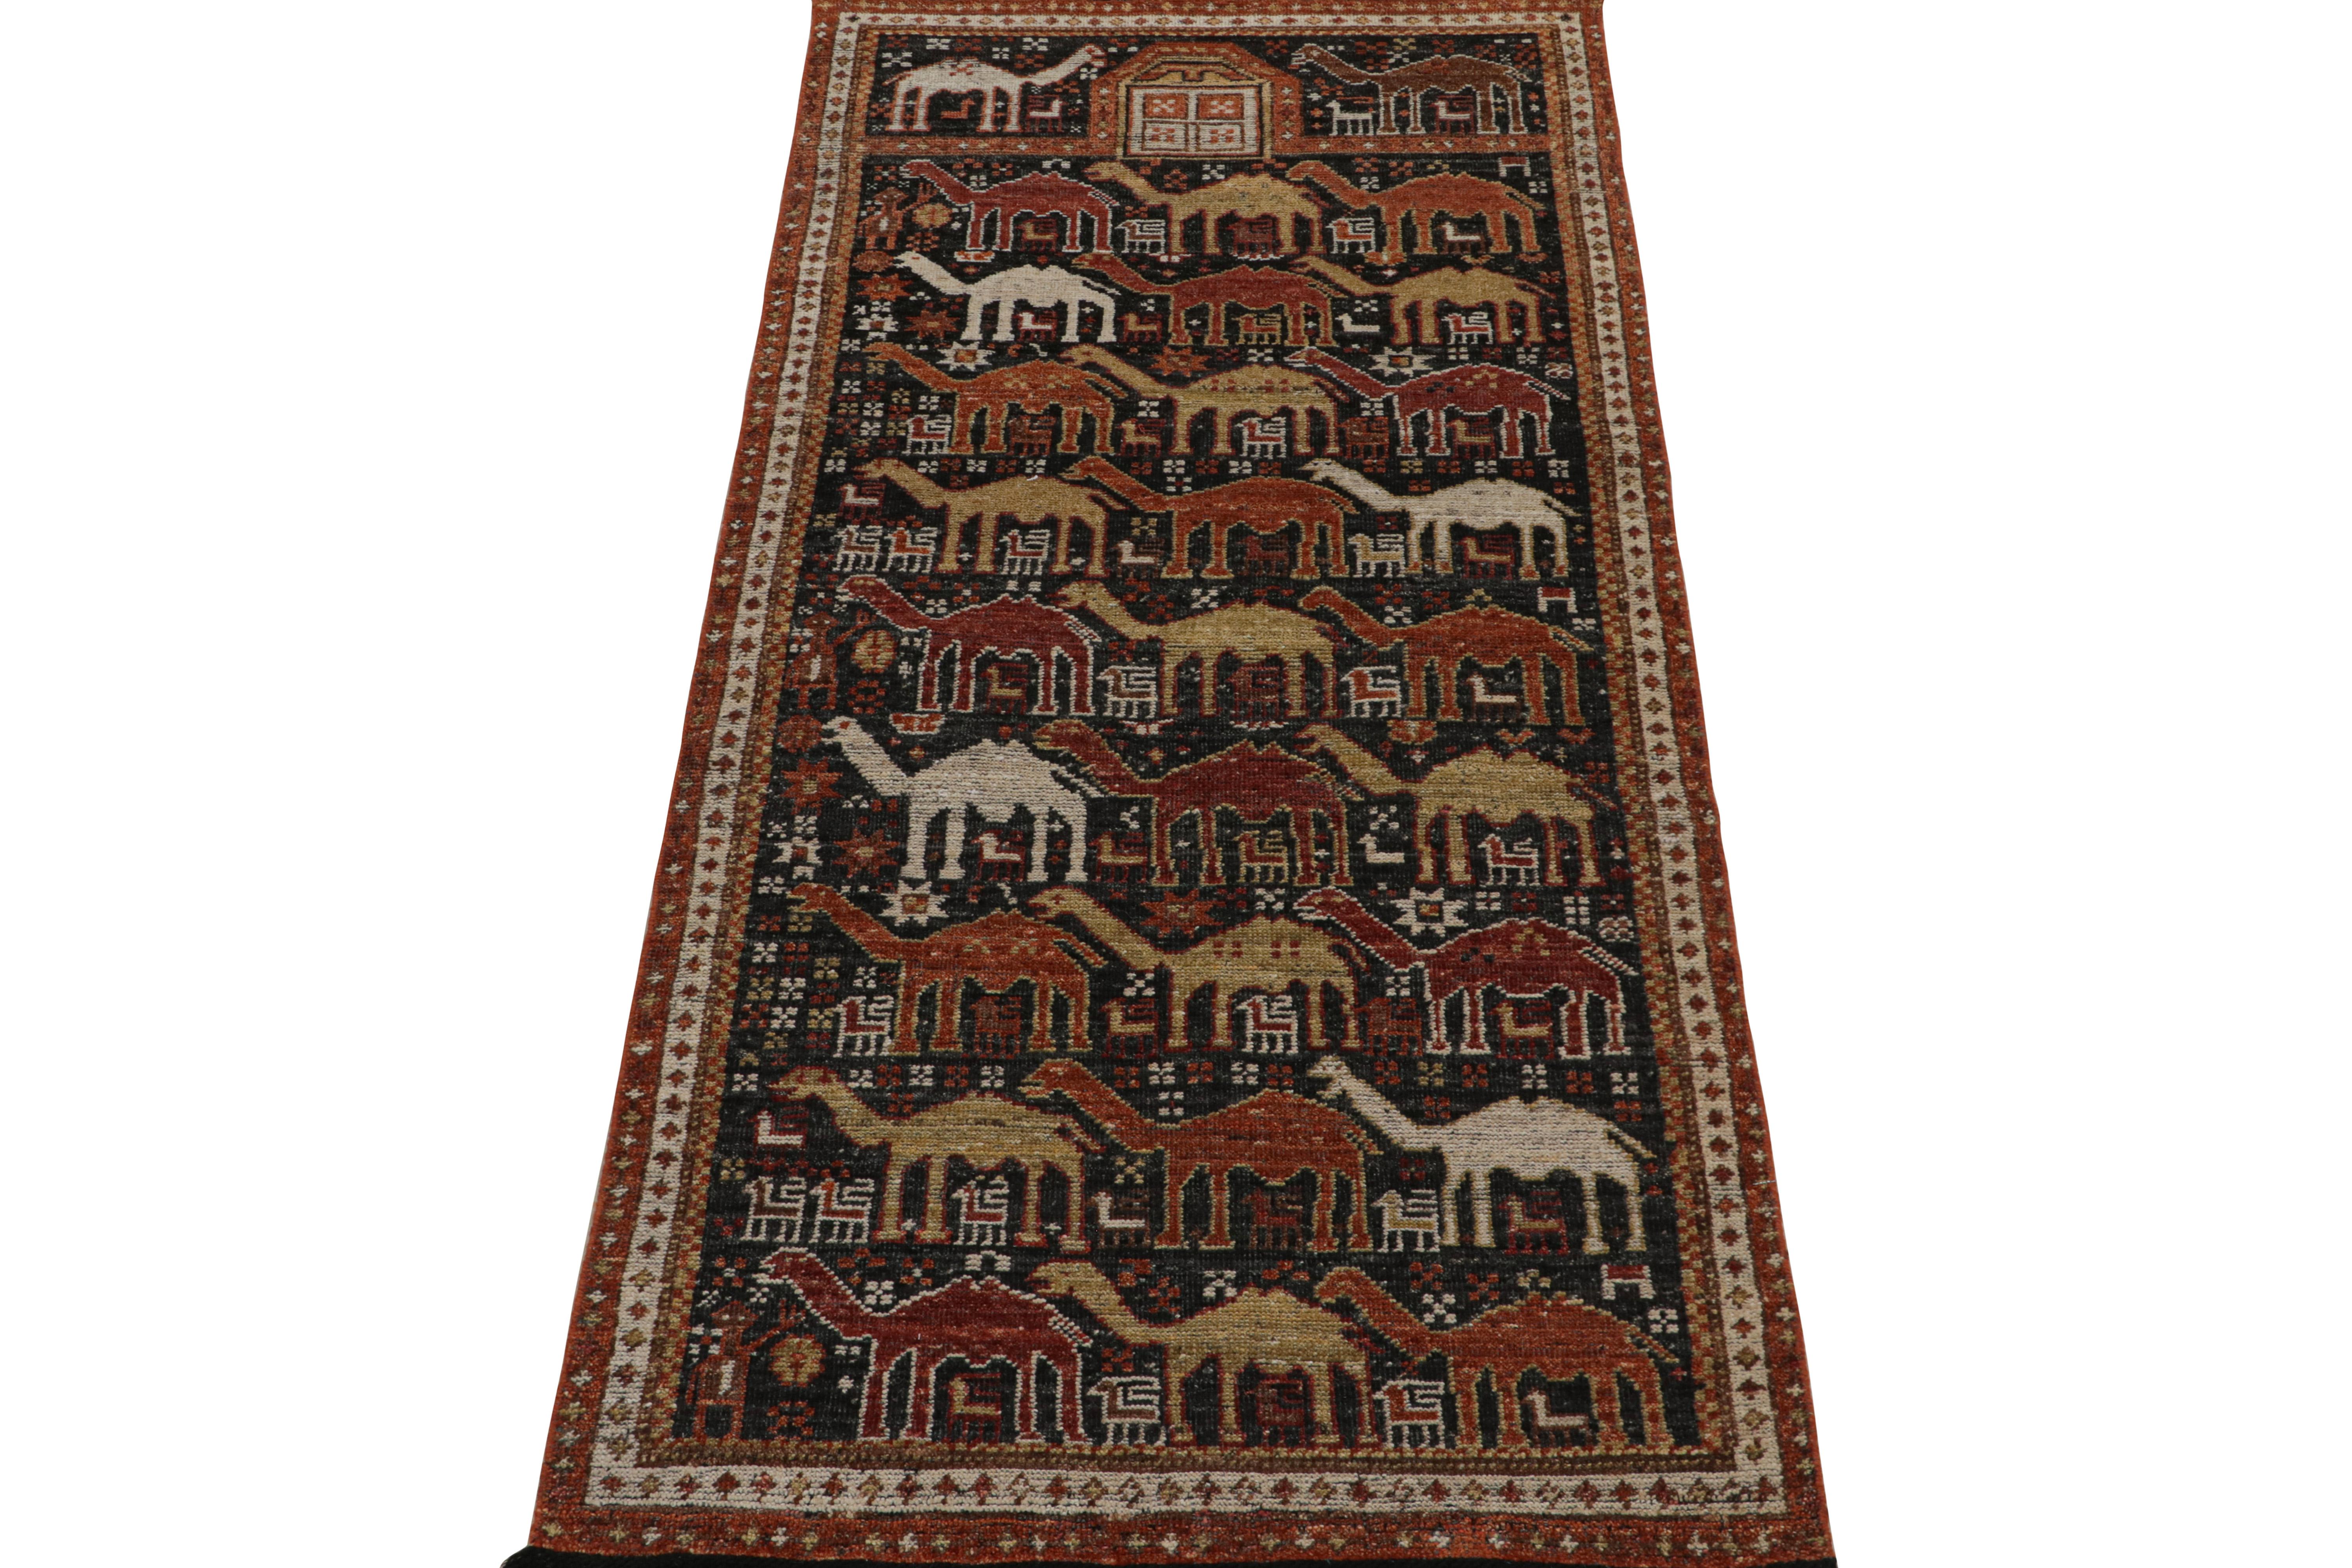 Inspired by antique Caucasian Shirvan rugs, this 3x7 classic style runner from the Burano Collection by Rug & Kilim showcases a montage of distinguished pictorial patterns. The rustic drawing captures the eye with a union of geometric designs,